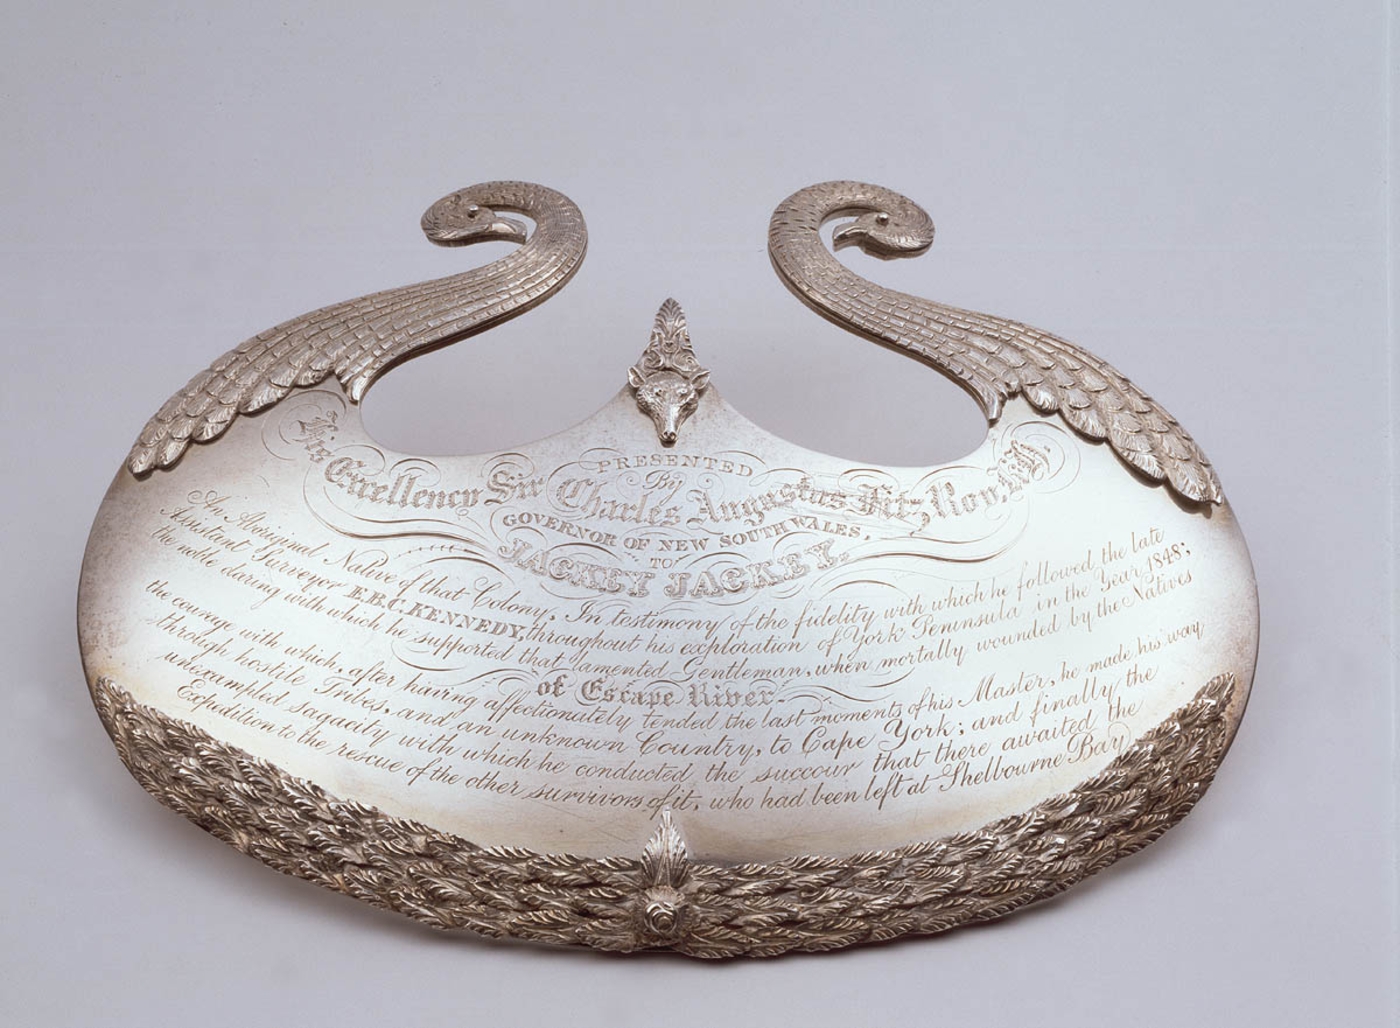 Photograph of Jackey Jackey's silver breast plate, ca. 1851. Source: Mitchell Library, State Library of New South Wales, Ref. SAFE/R453.